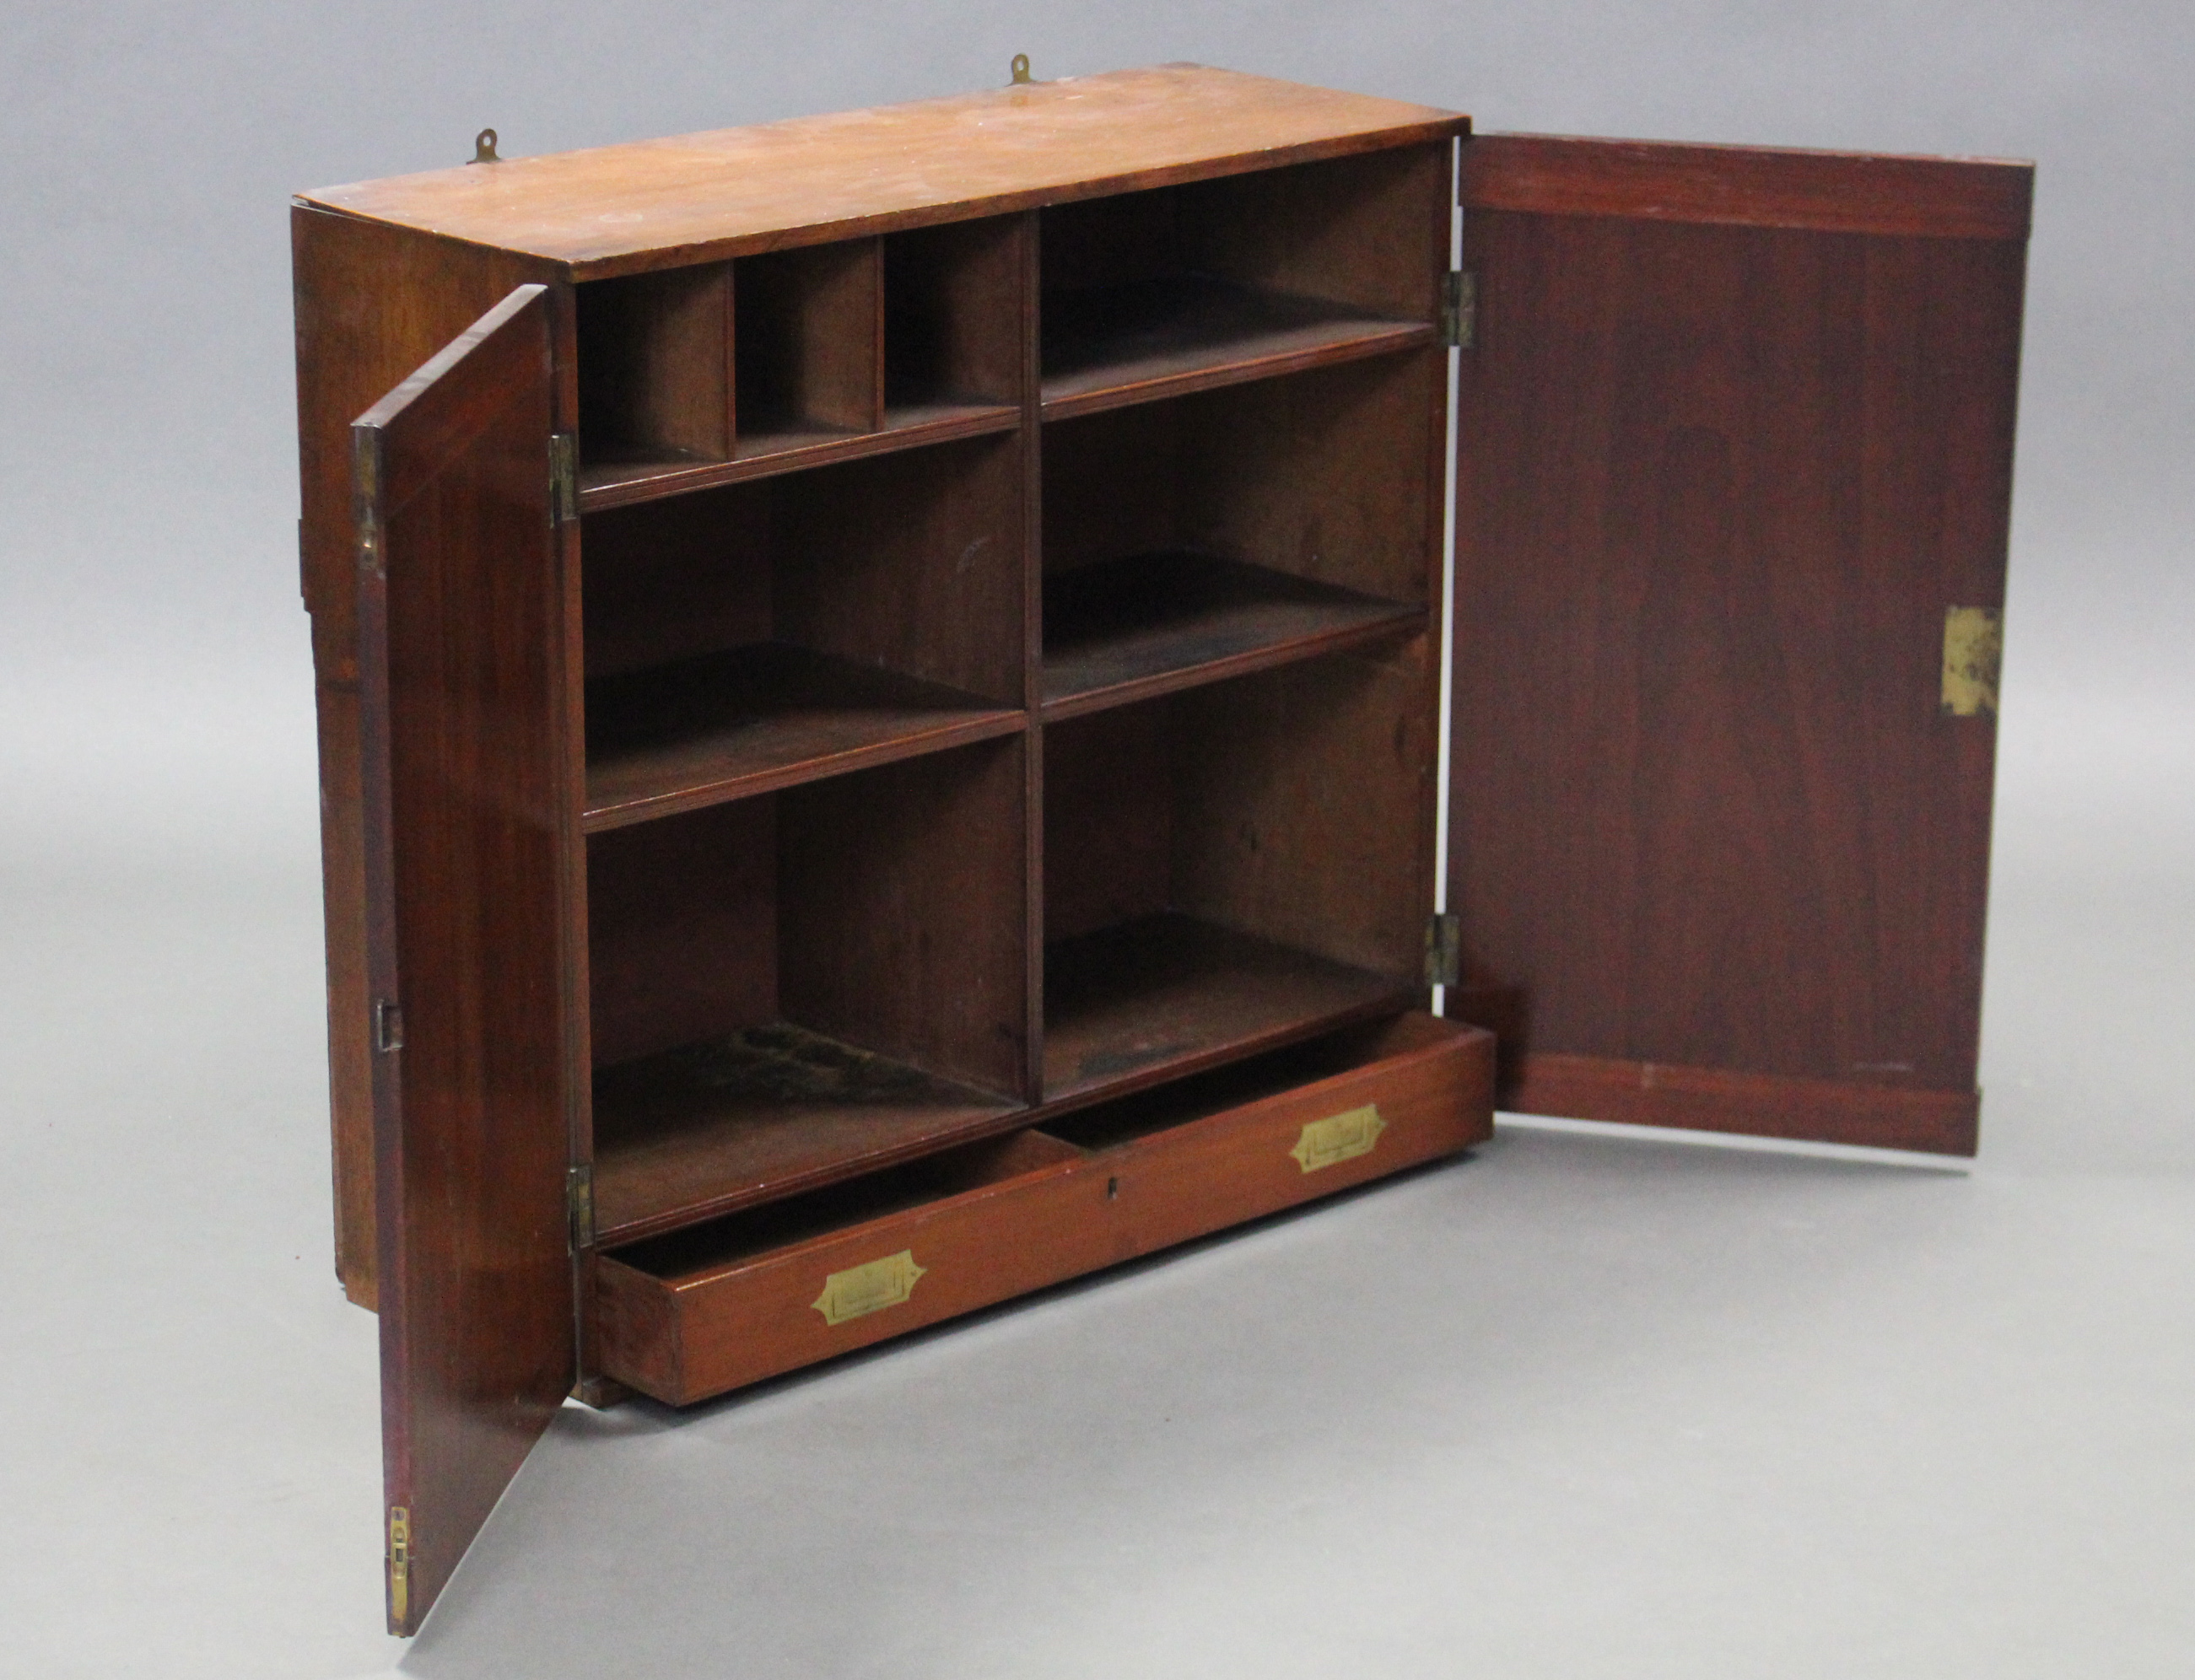 AN EARLY 19th century TEAK CAMPAIGN WALL-MOUNTED CABINET, fitted with an arrangement of five shelves - Image 2 of 2